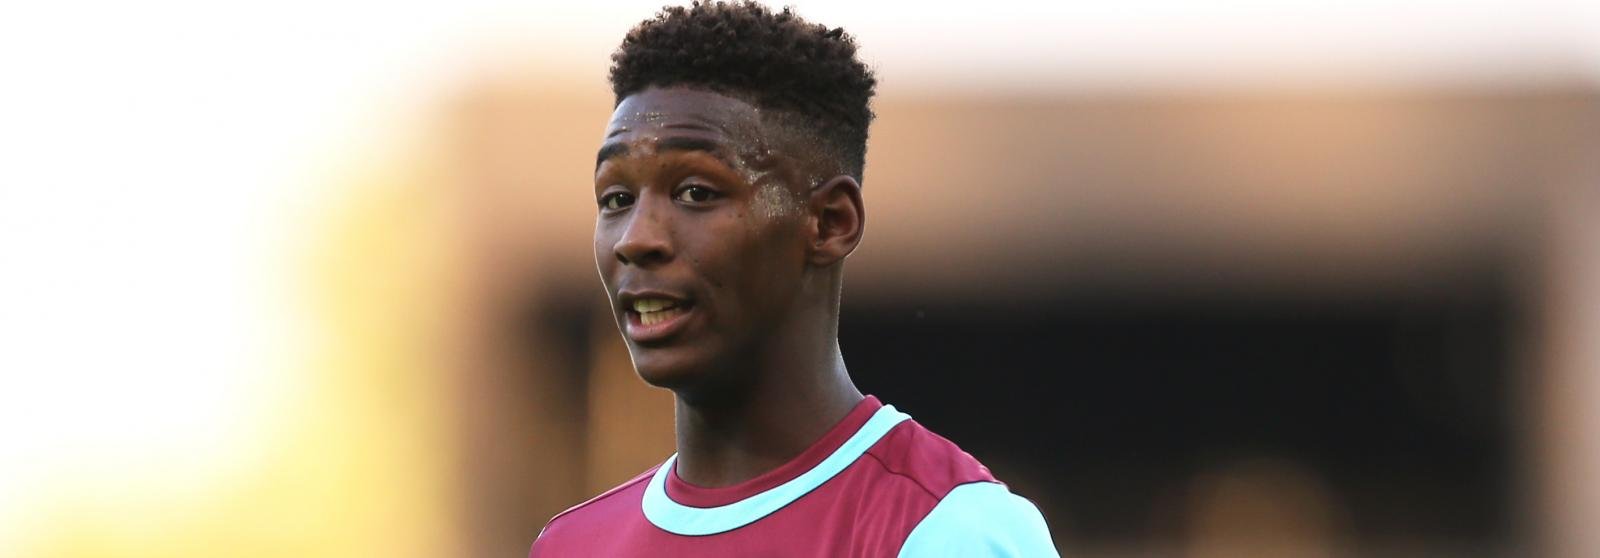 Manchester United eyeing West Ham United’s 17-year-old teenager